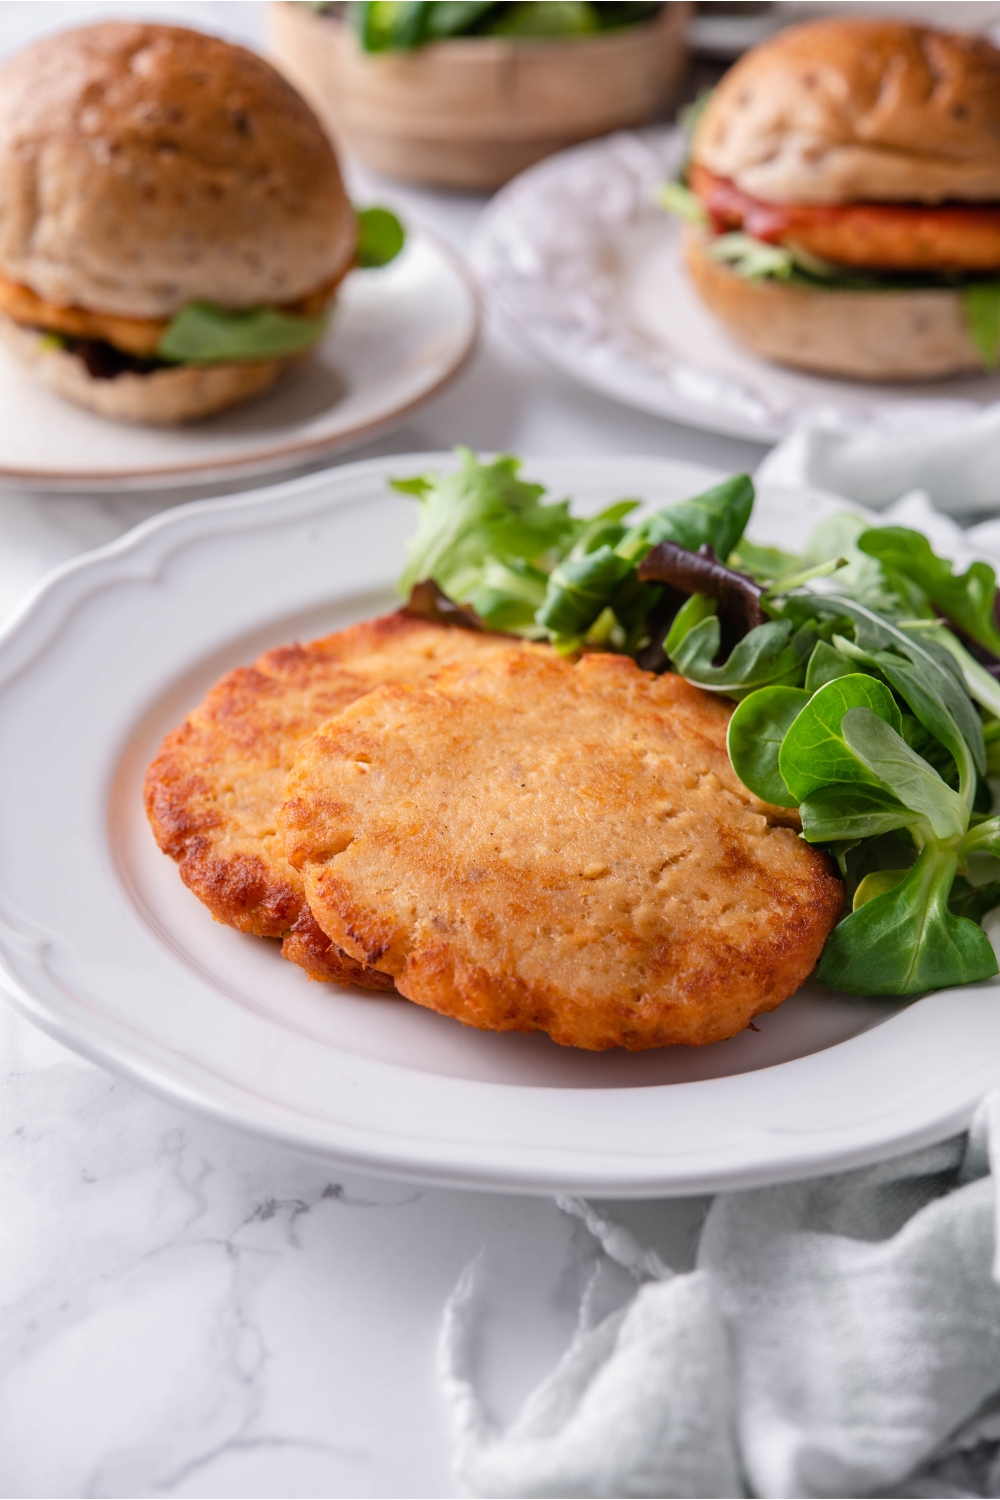 Two fried salmon patties layered on top of each other on a white plate with a side salad.